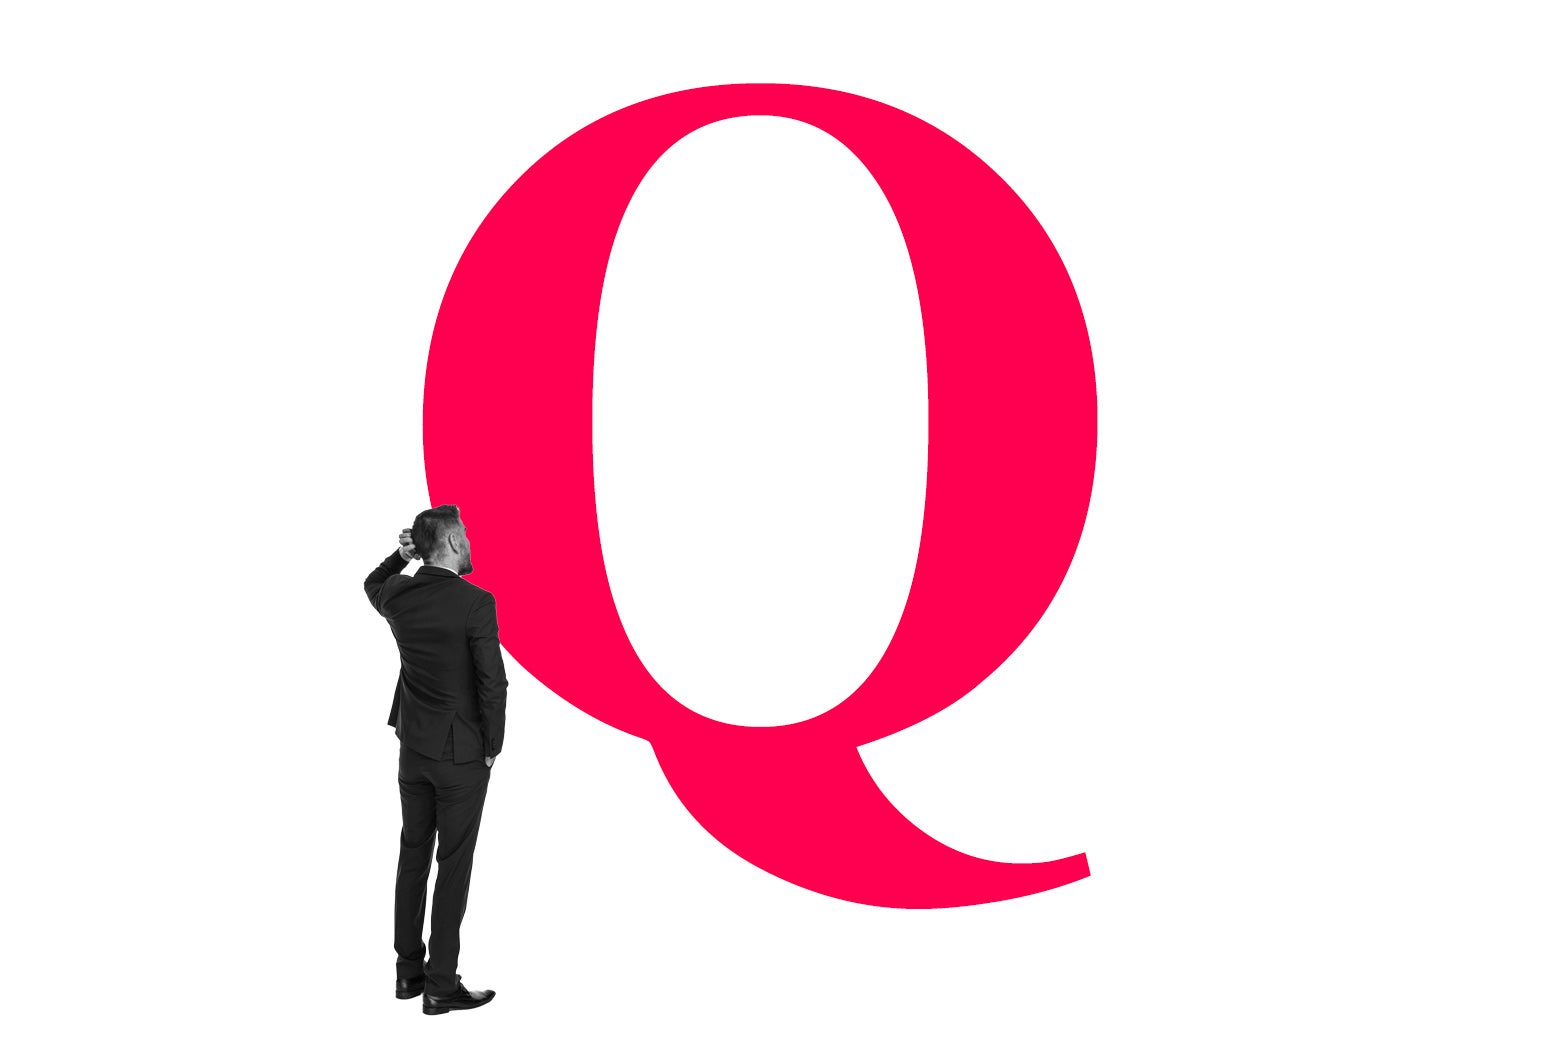 Man scratching his head looking at a large Q.